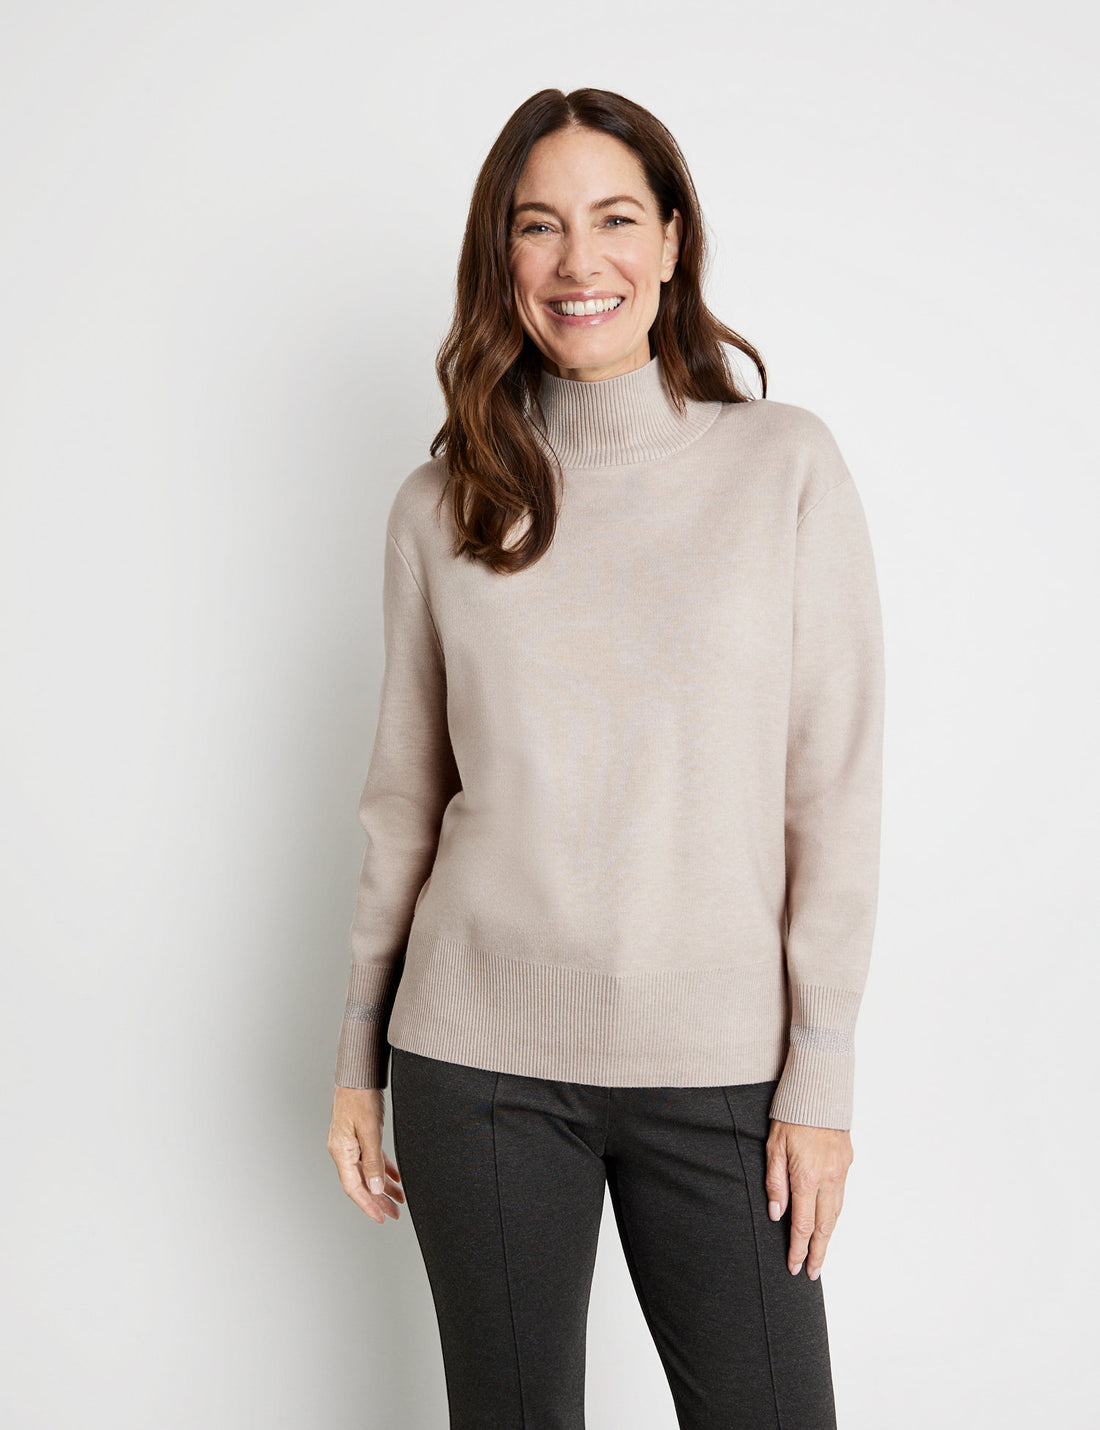 Soft Jumper With A Turtleneck And Elongated Back Section_271033-35708_905440_01